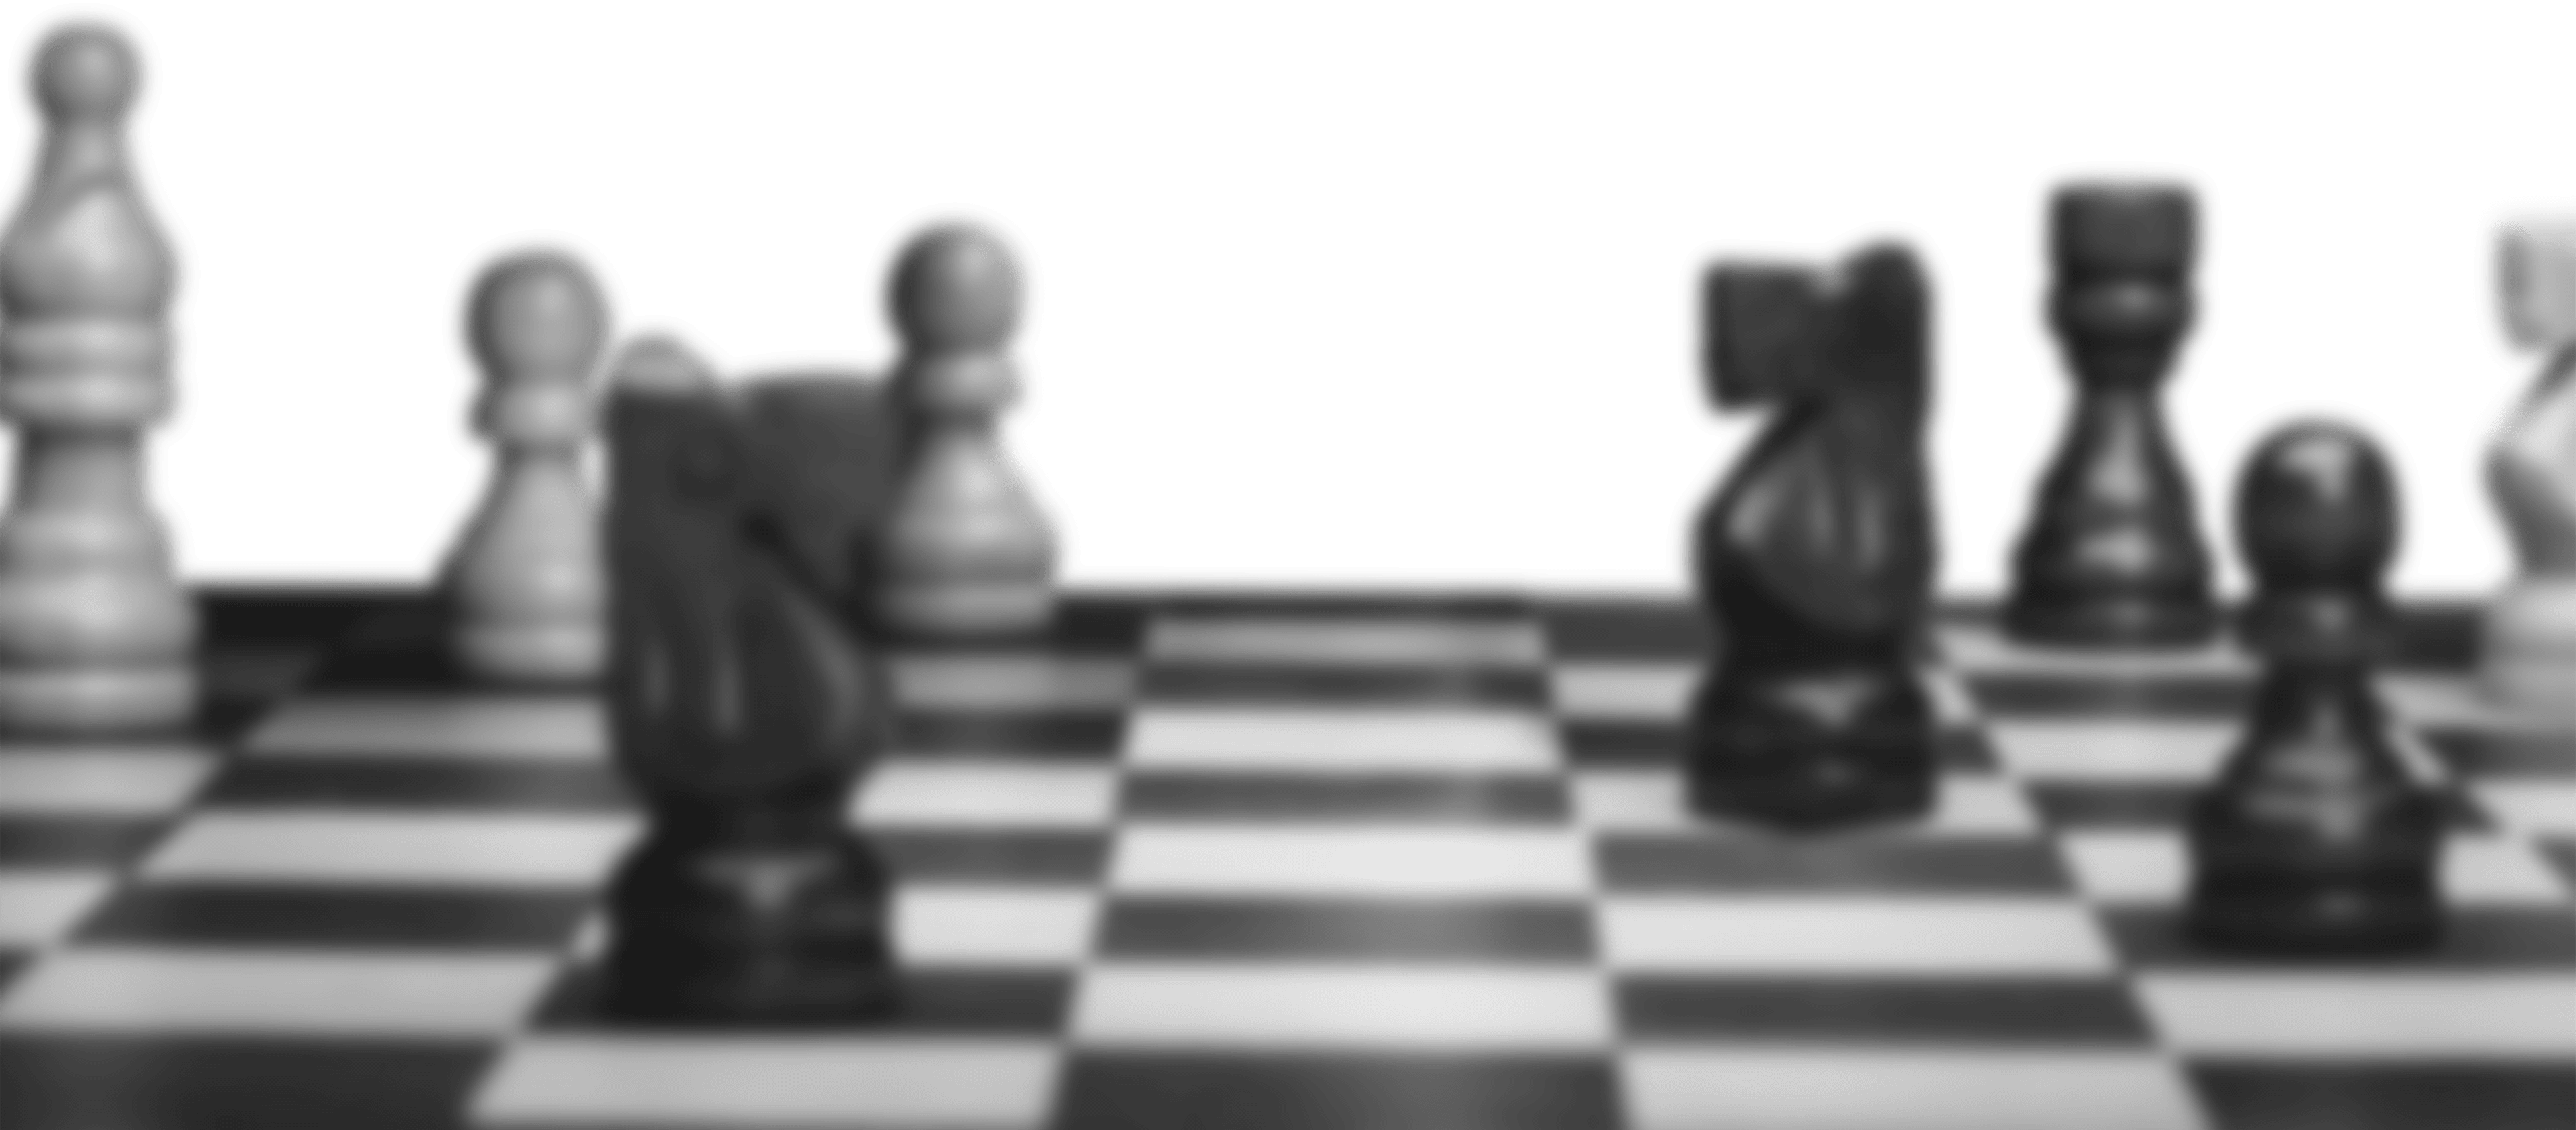 blurred chess board with pieces viewed from angle